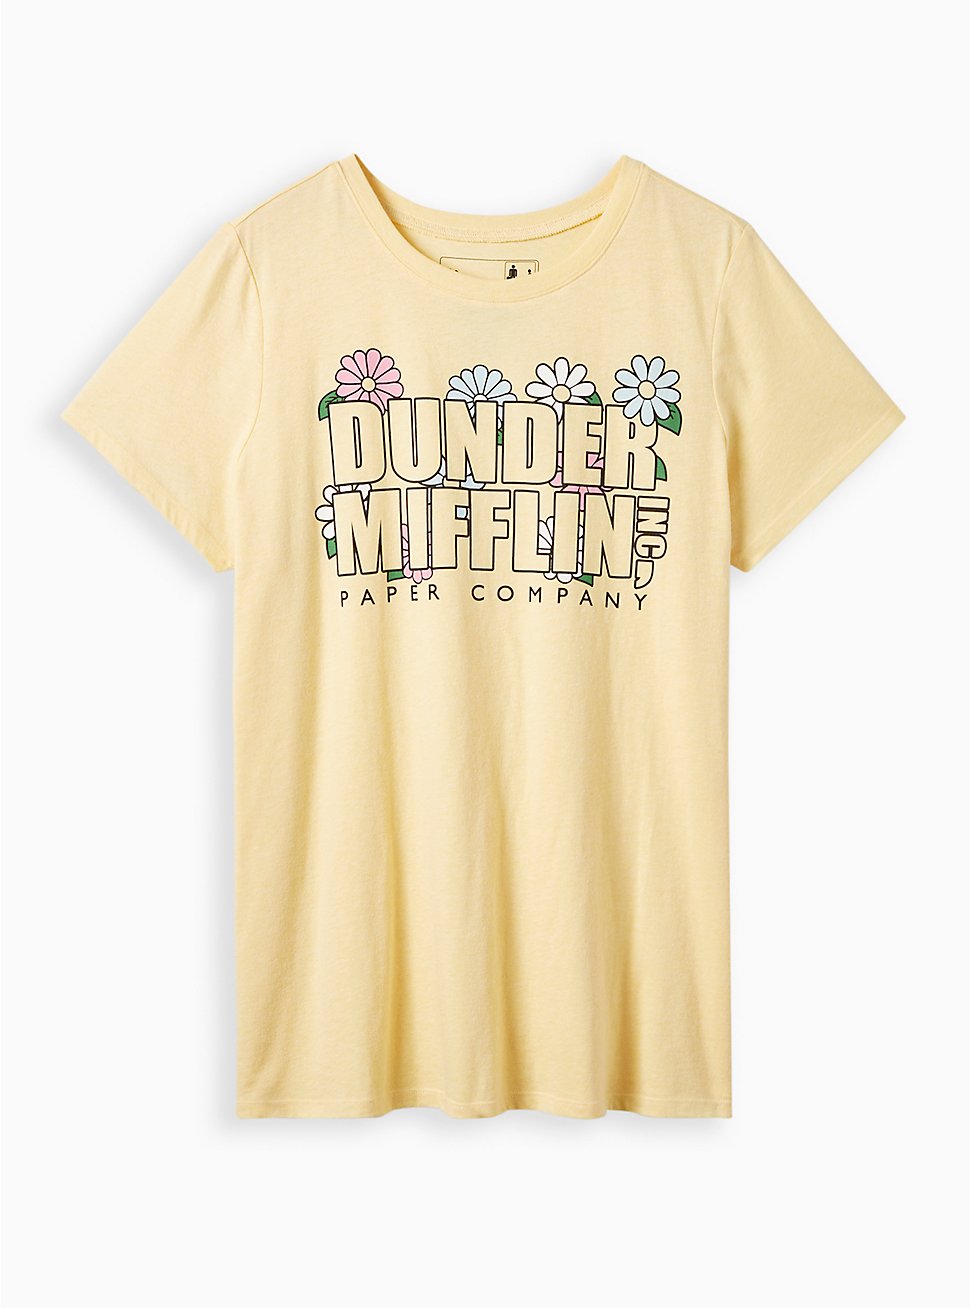 The Office Classic Fit Crew Tee - Cotton Under Mifflin Soft Yellow, SUNDRESS, hi-res